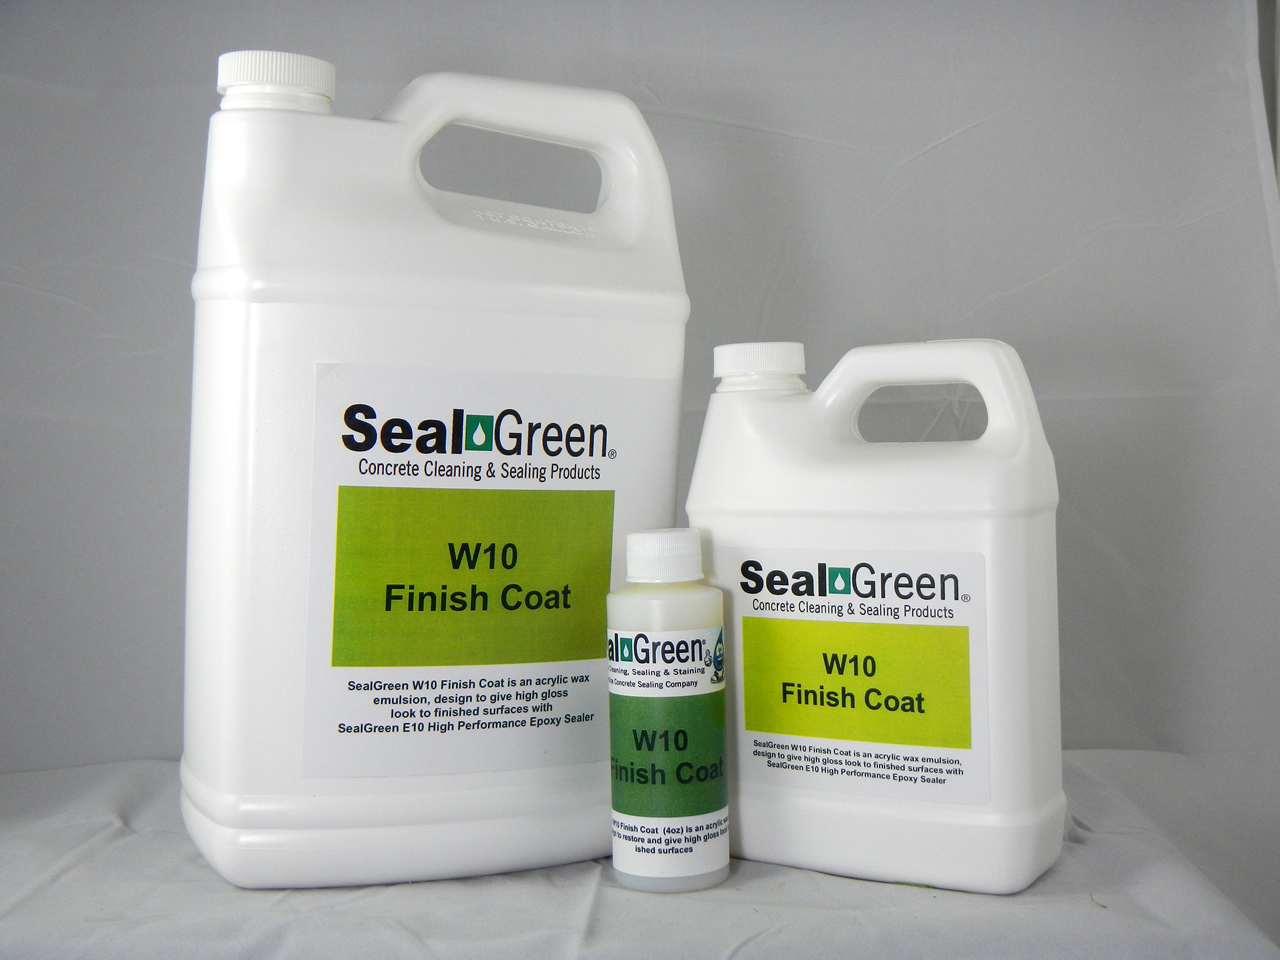 I finishing the floor with your product. SealGreen W10 Finish Gloss sealer and the gloss does not look even through